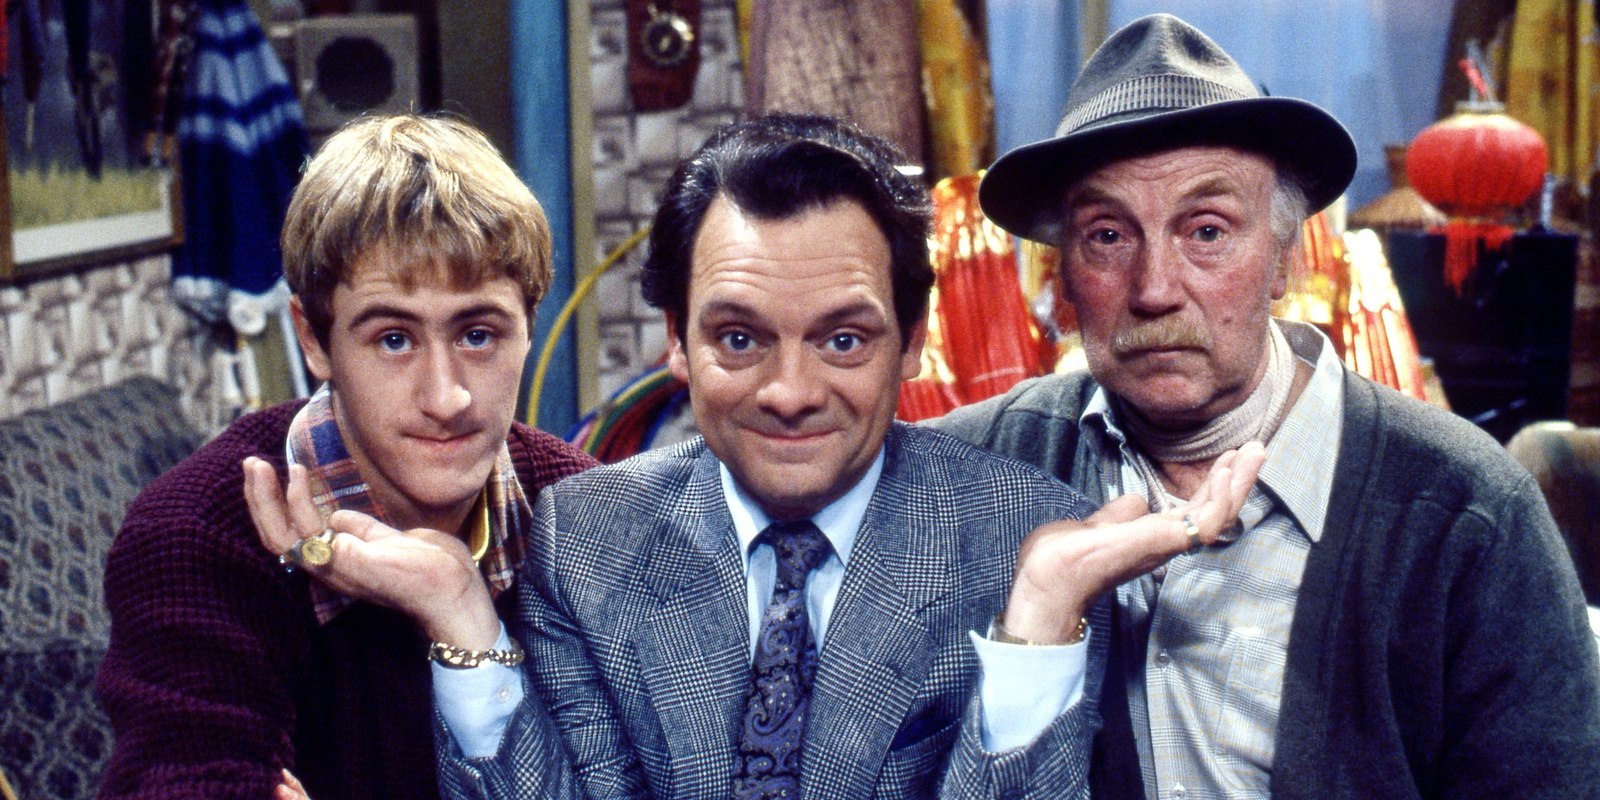 Only Fools and Horses is the 'greatest' British comedy | YouGov - Only Fools And Horses Season 7 Episode 1